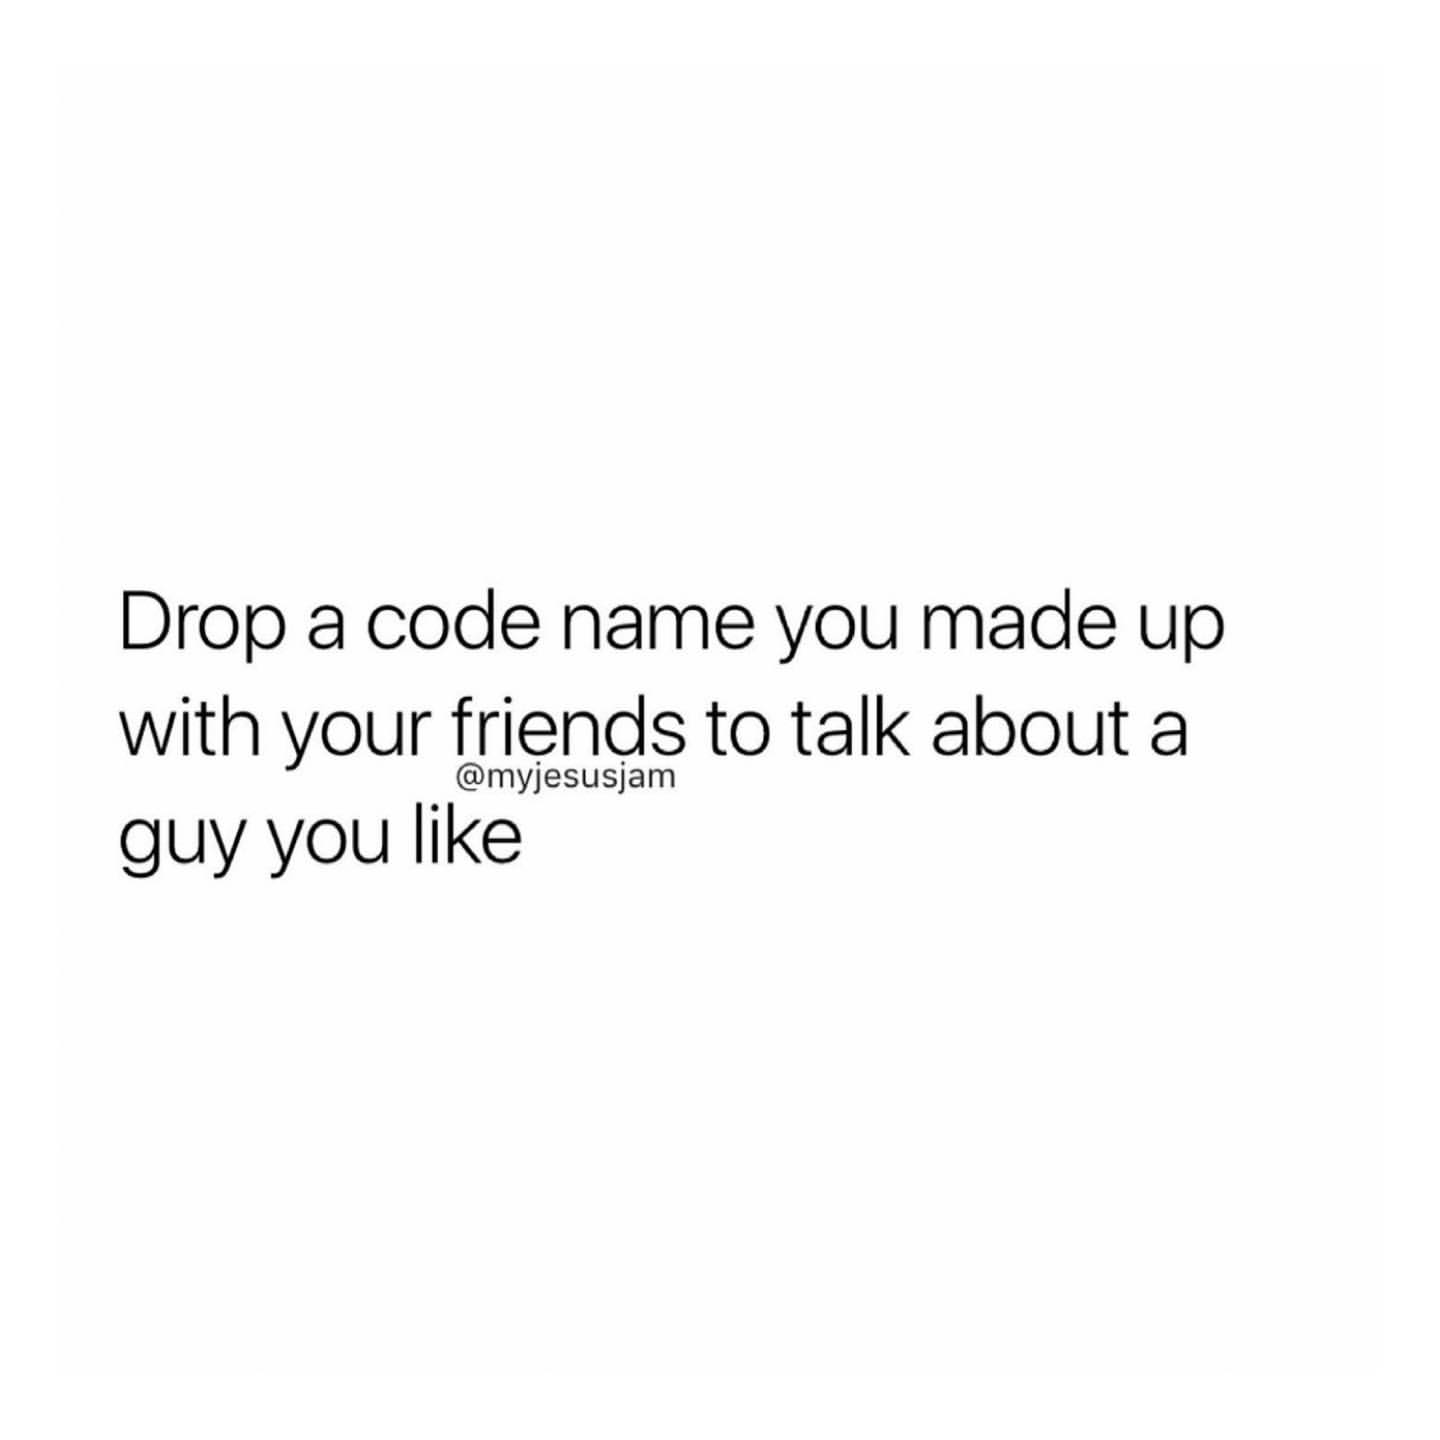 Drop a code name you made up with your friends to talk about a guy you like.